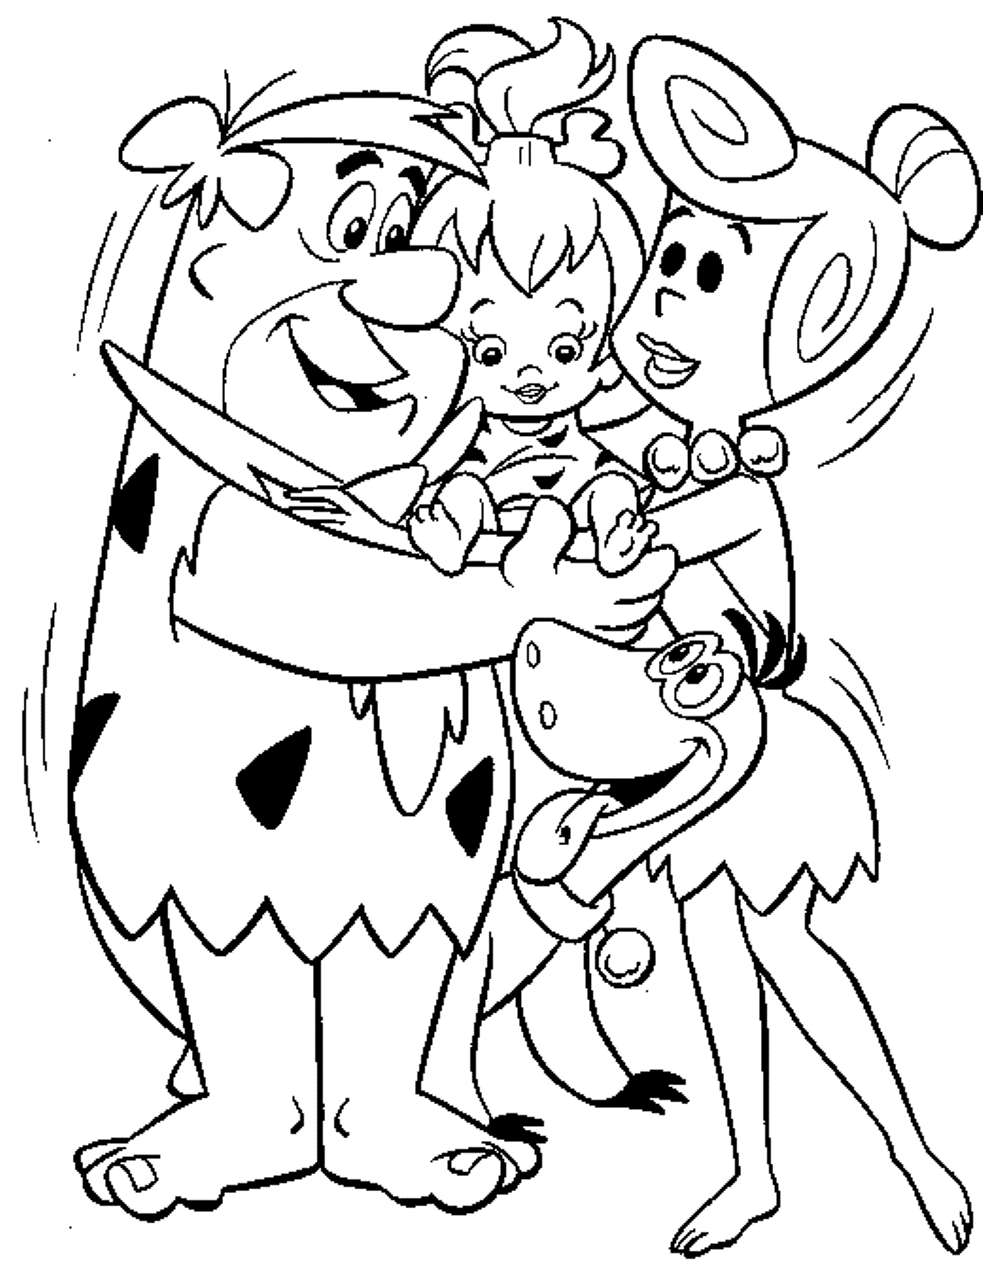 Flintstone Coloring Page - Coloring Home